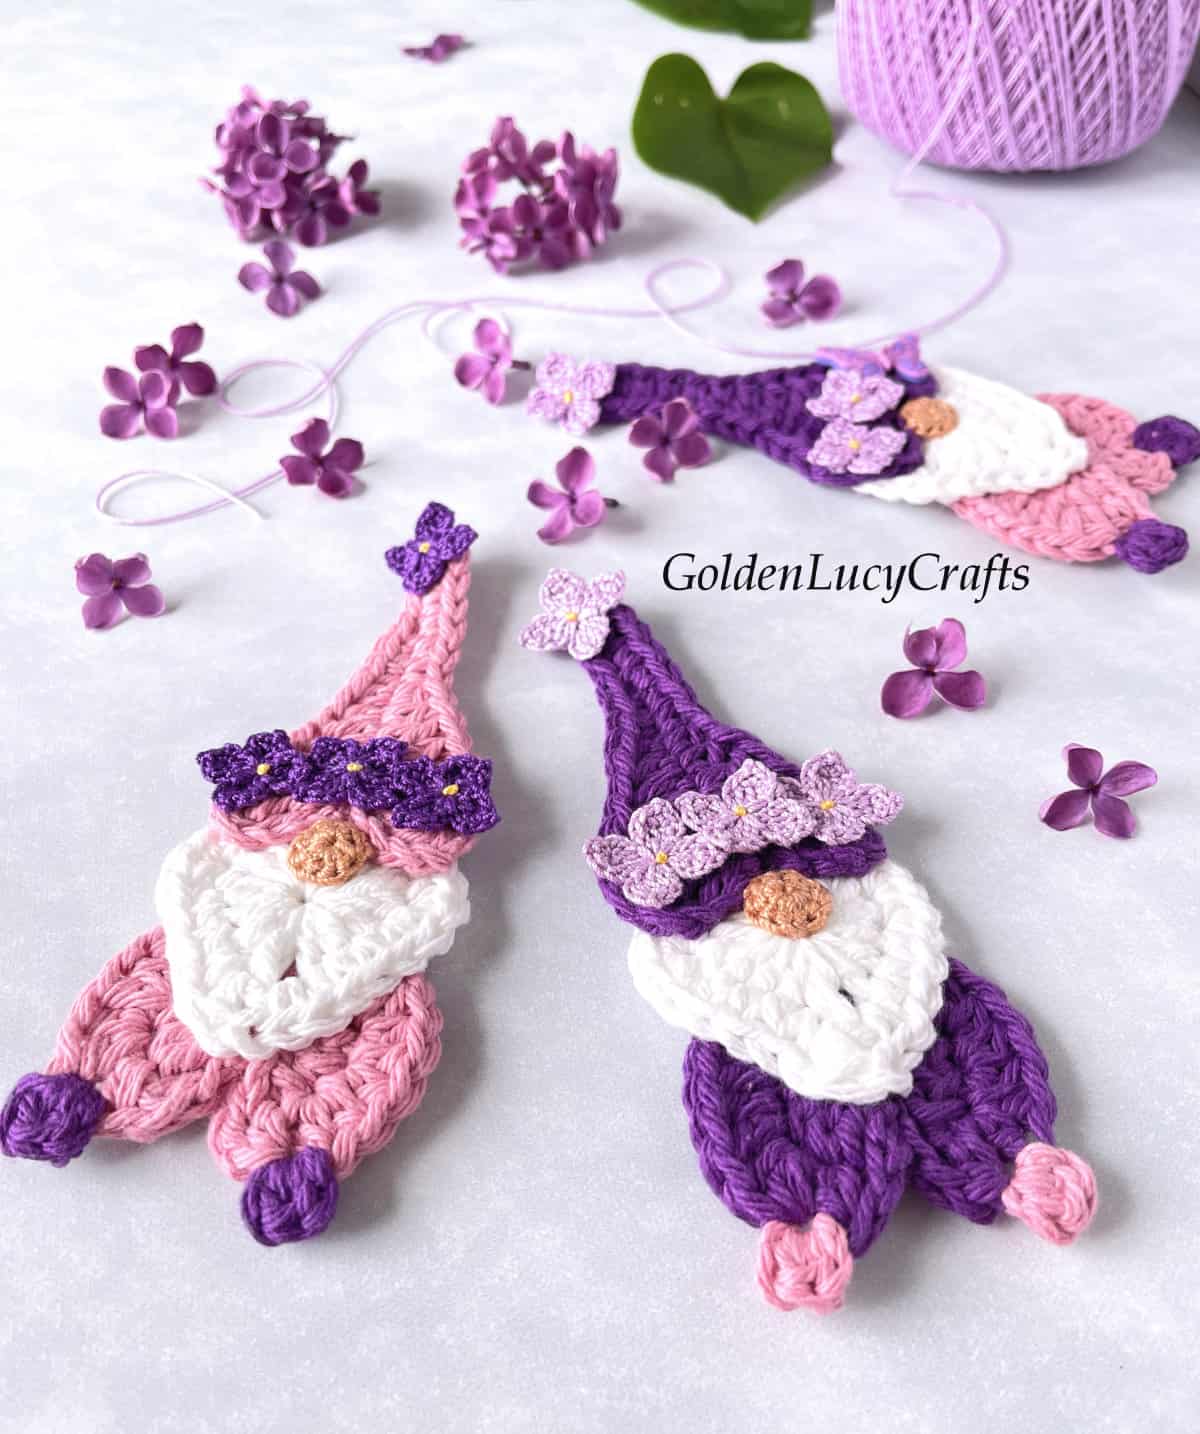 Crochet heart gnomes close up picture.